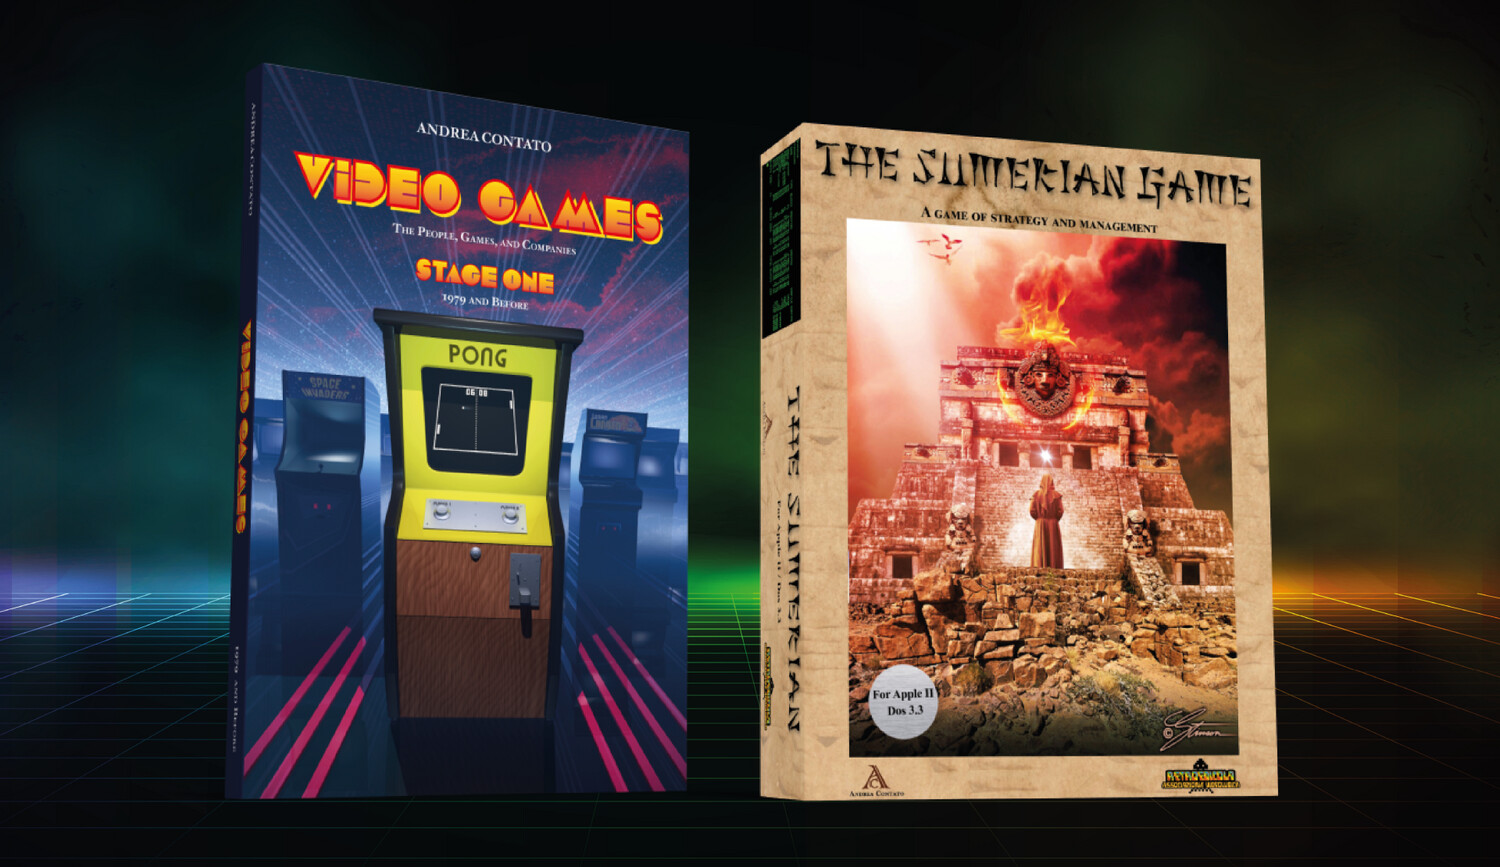 The Sumerian Game (Big Box limited ed from 27 to 100) + Video Games - Stage 1 (Hardcover - English - Preorder - Fall 2023)